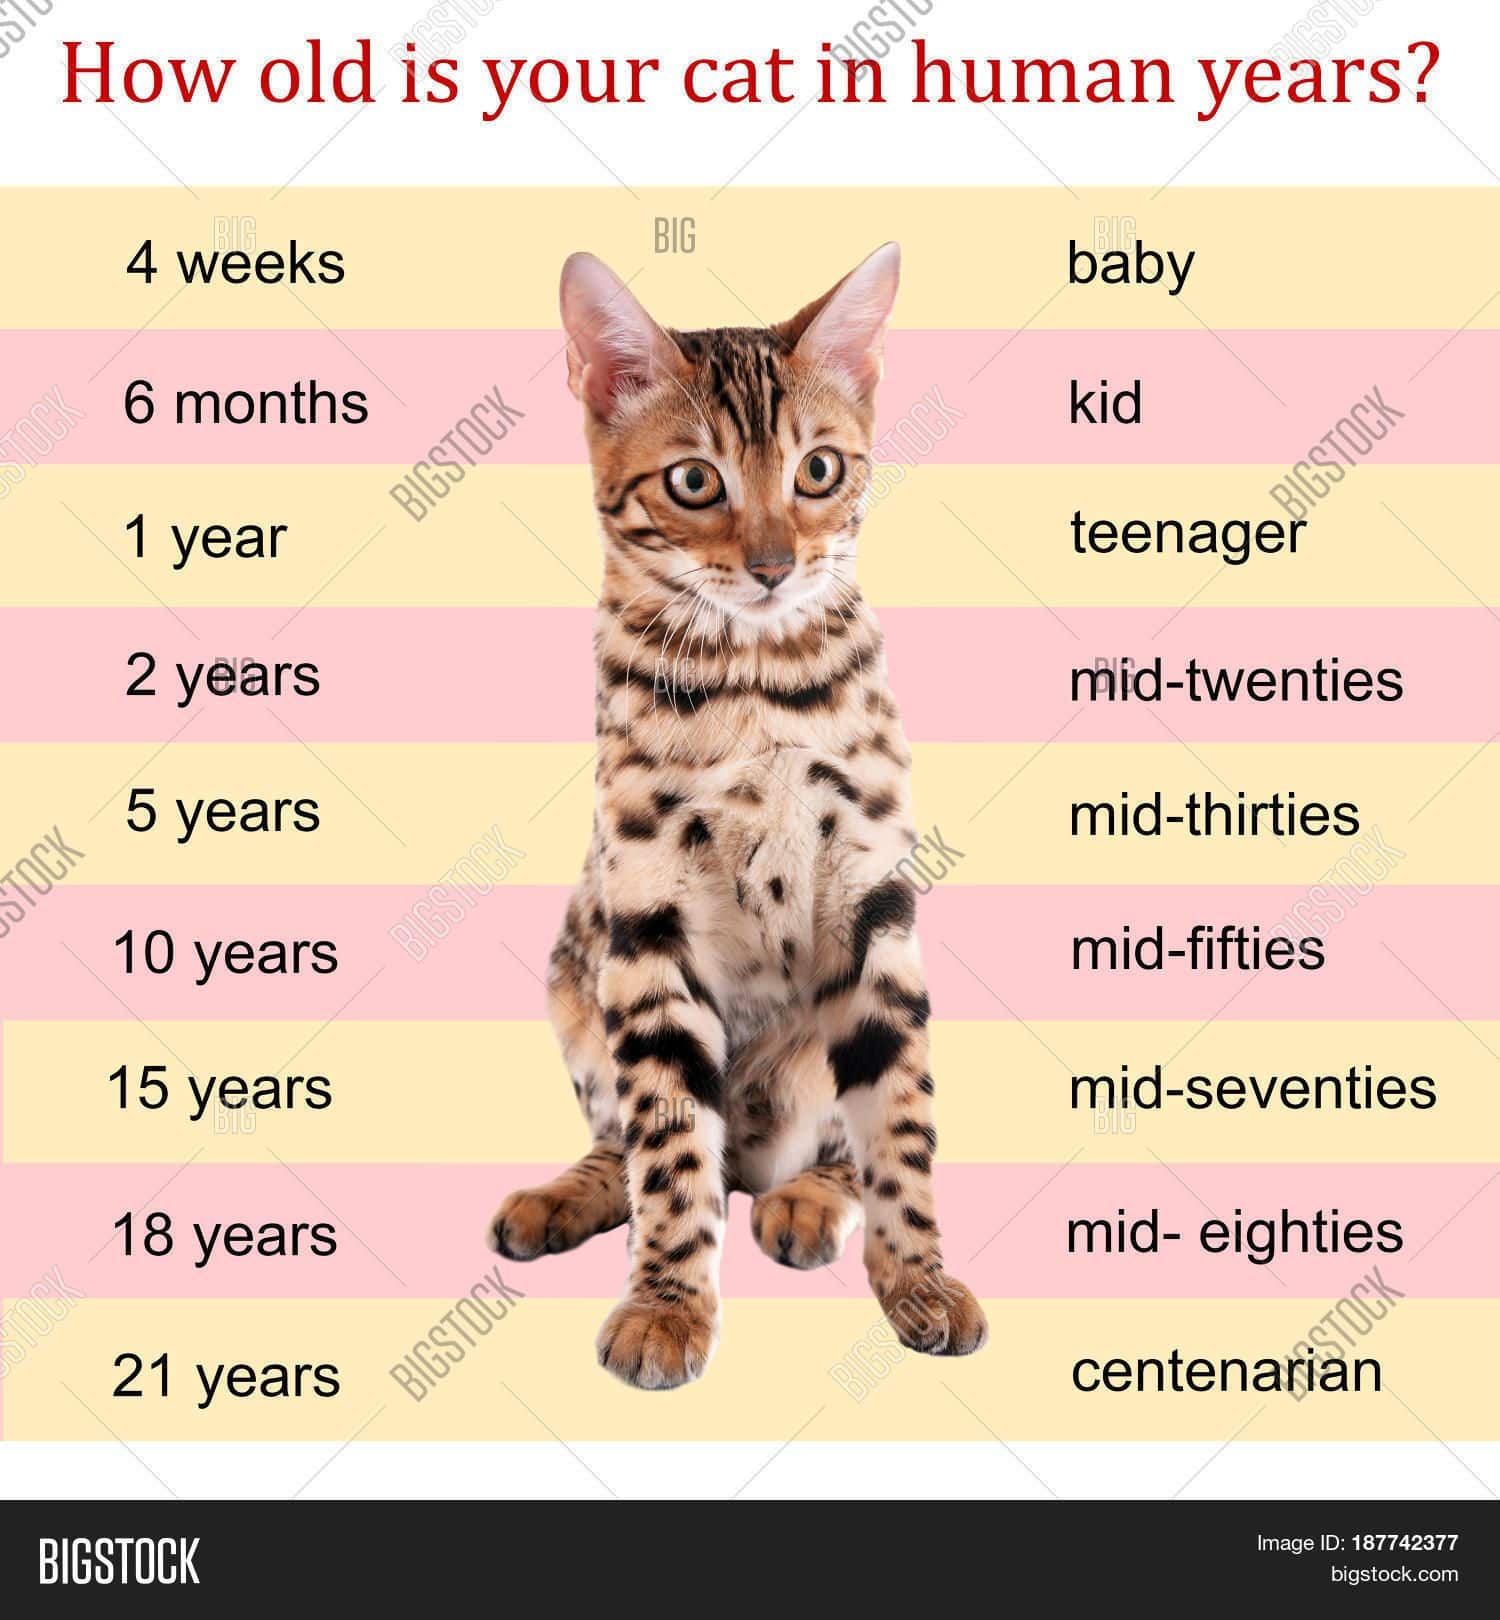 Pin on cat ages vs human